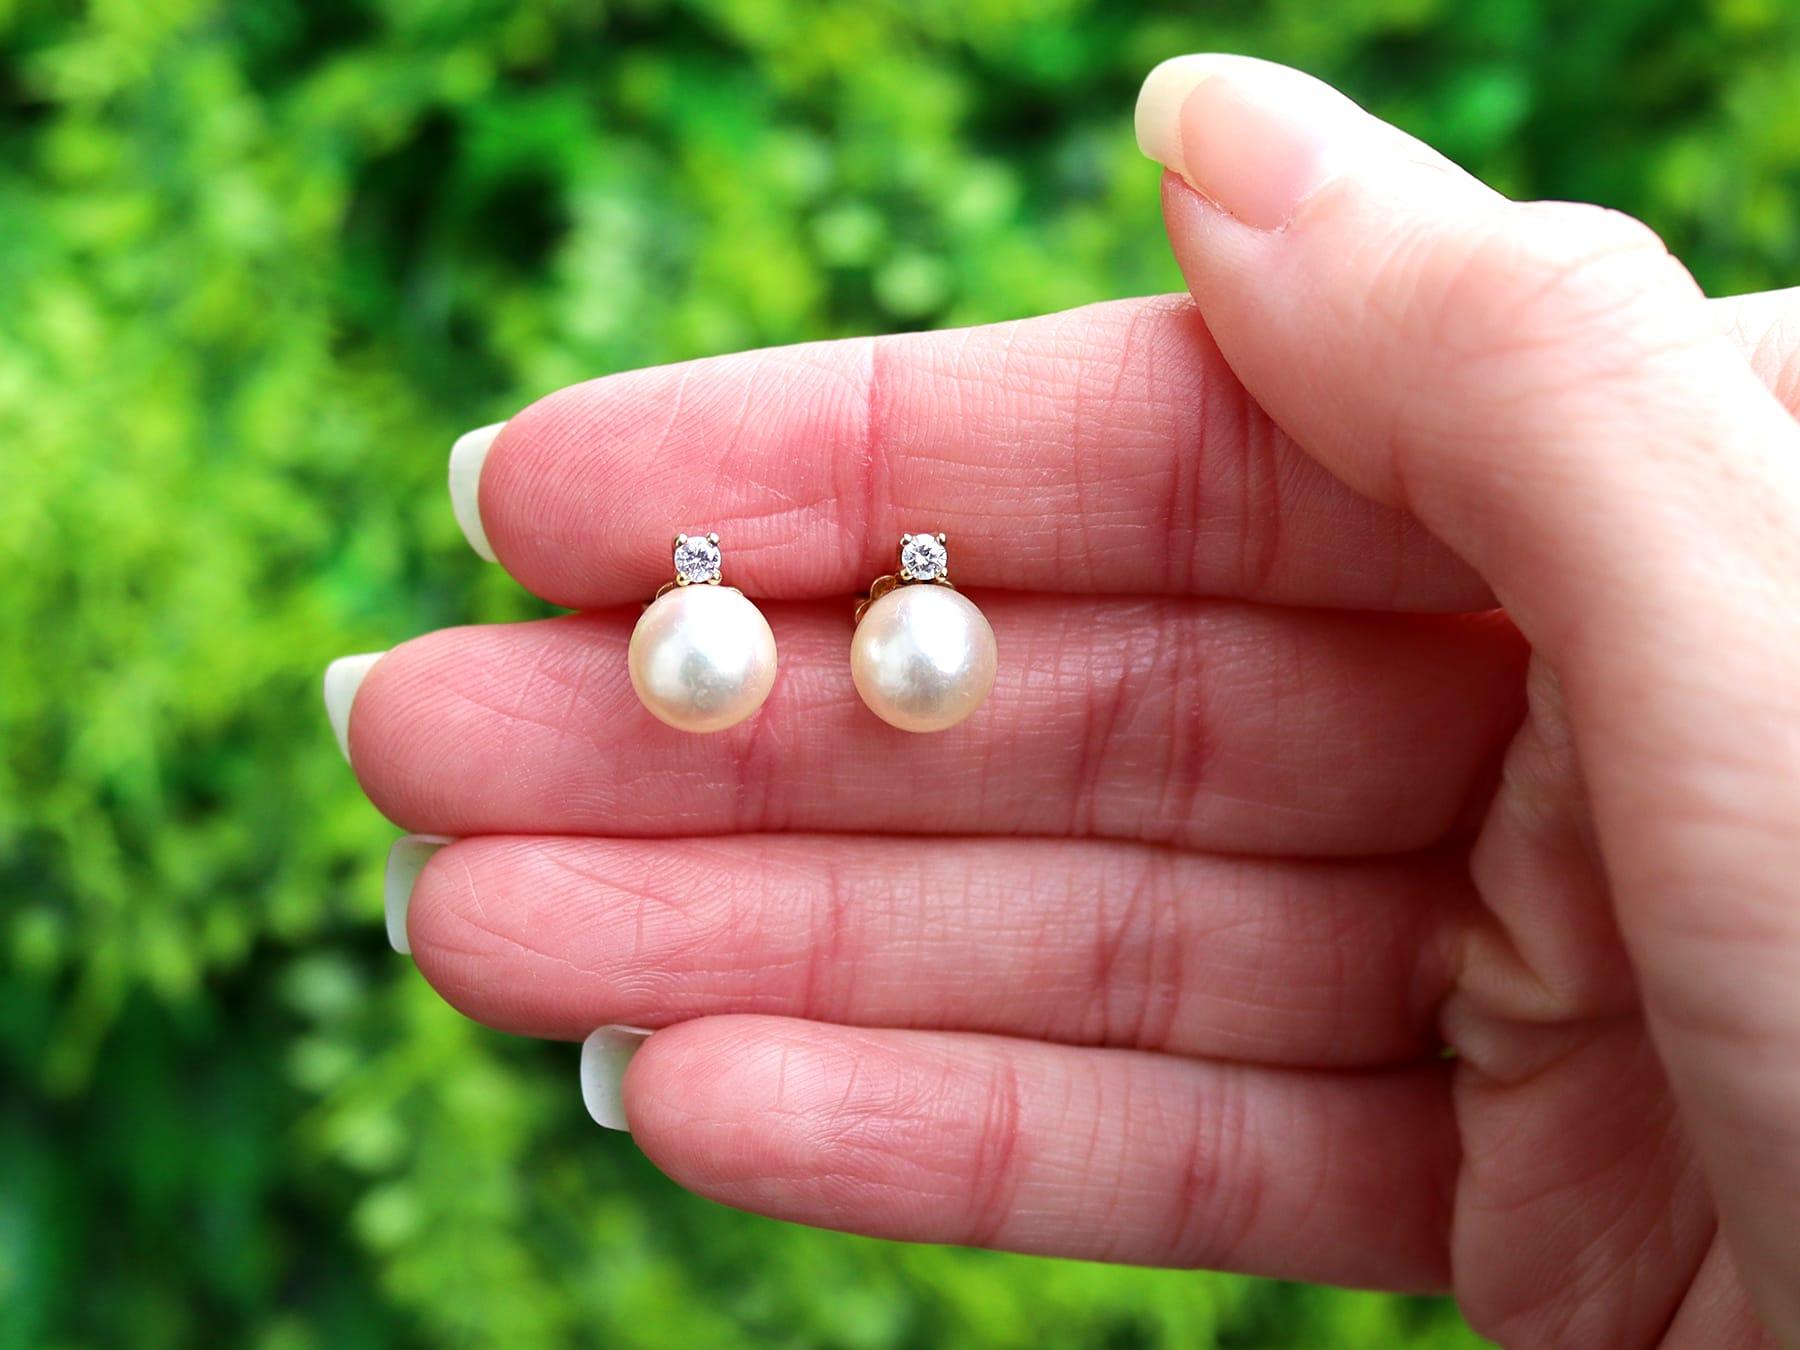 An impressive pair of vintage European cultured pearl and 0.06 carat diamond, 14 karat yellow gold stud earrings; part of our diverse pearl jewelry collections.

These fine and impressive vintage pearl stud earrings have been crafted in 14k yellow